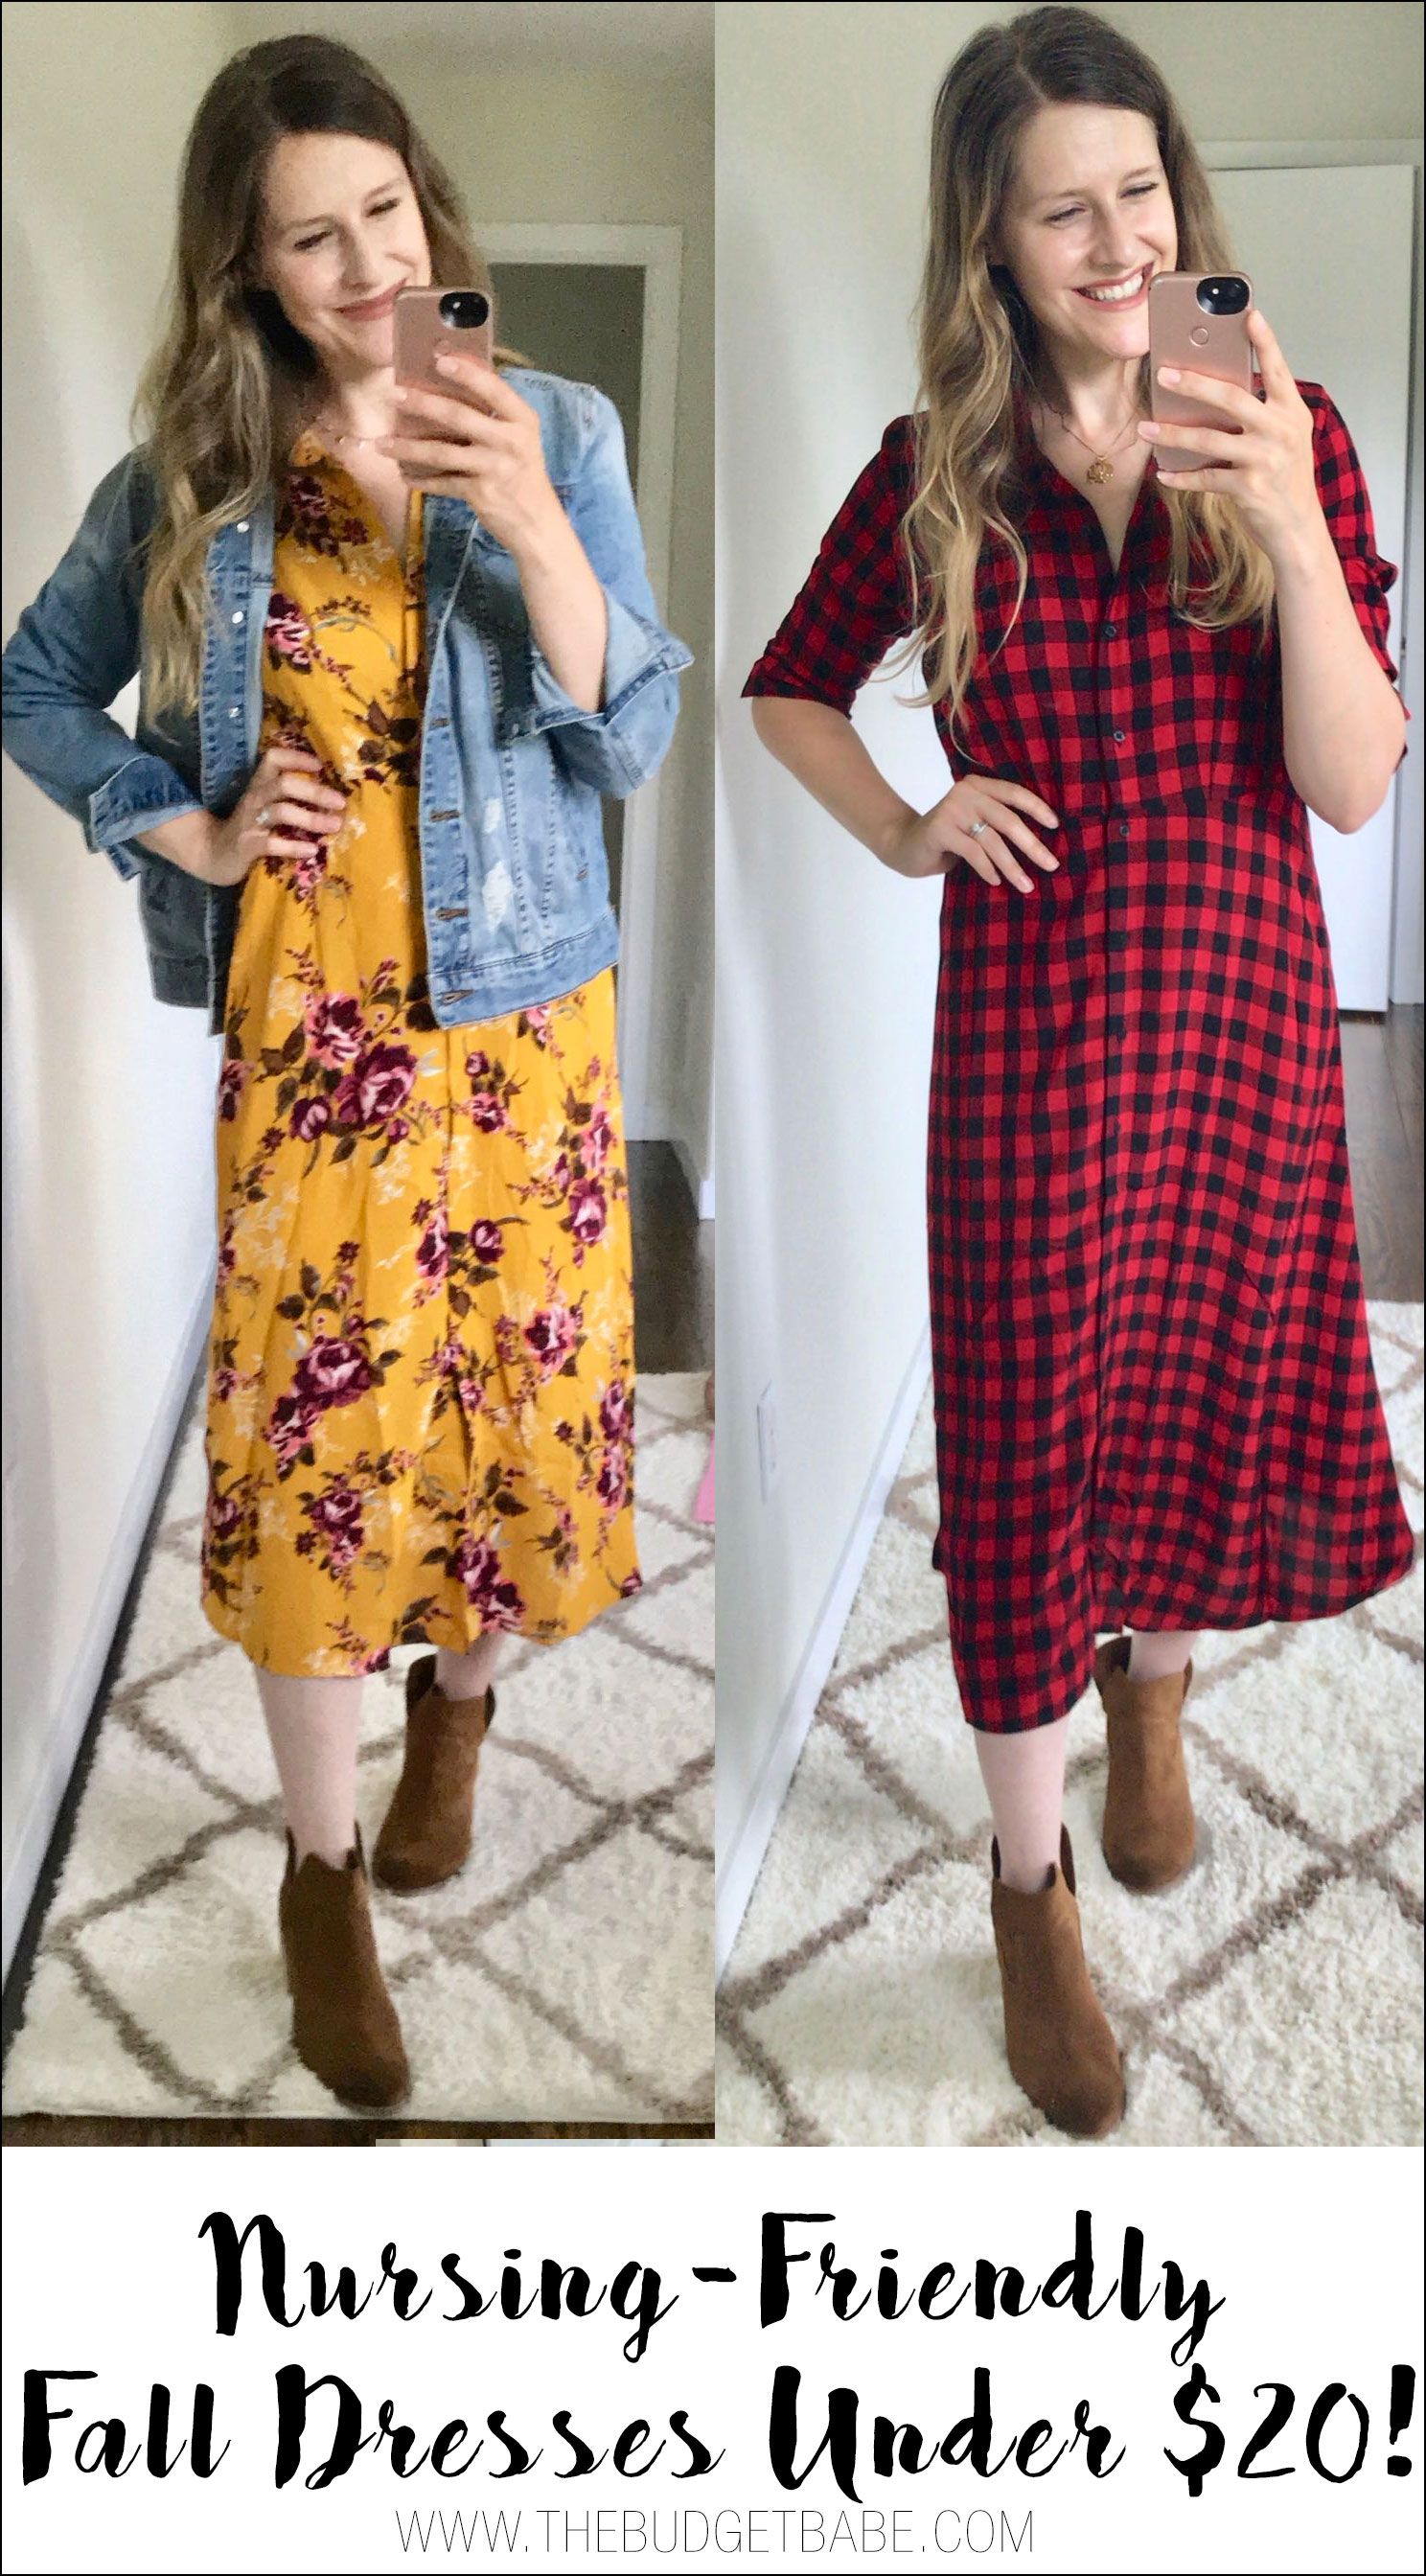 Cute button front dresses are nursing friendly, too! Just $18.94 at Walmart